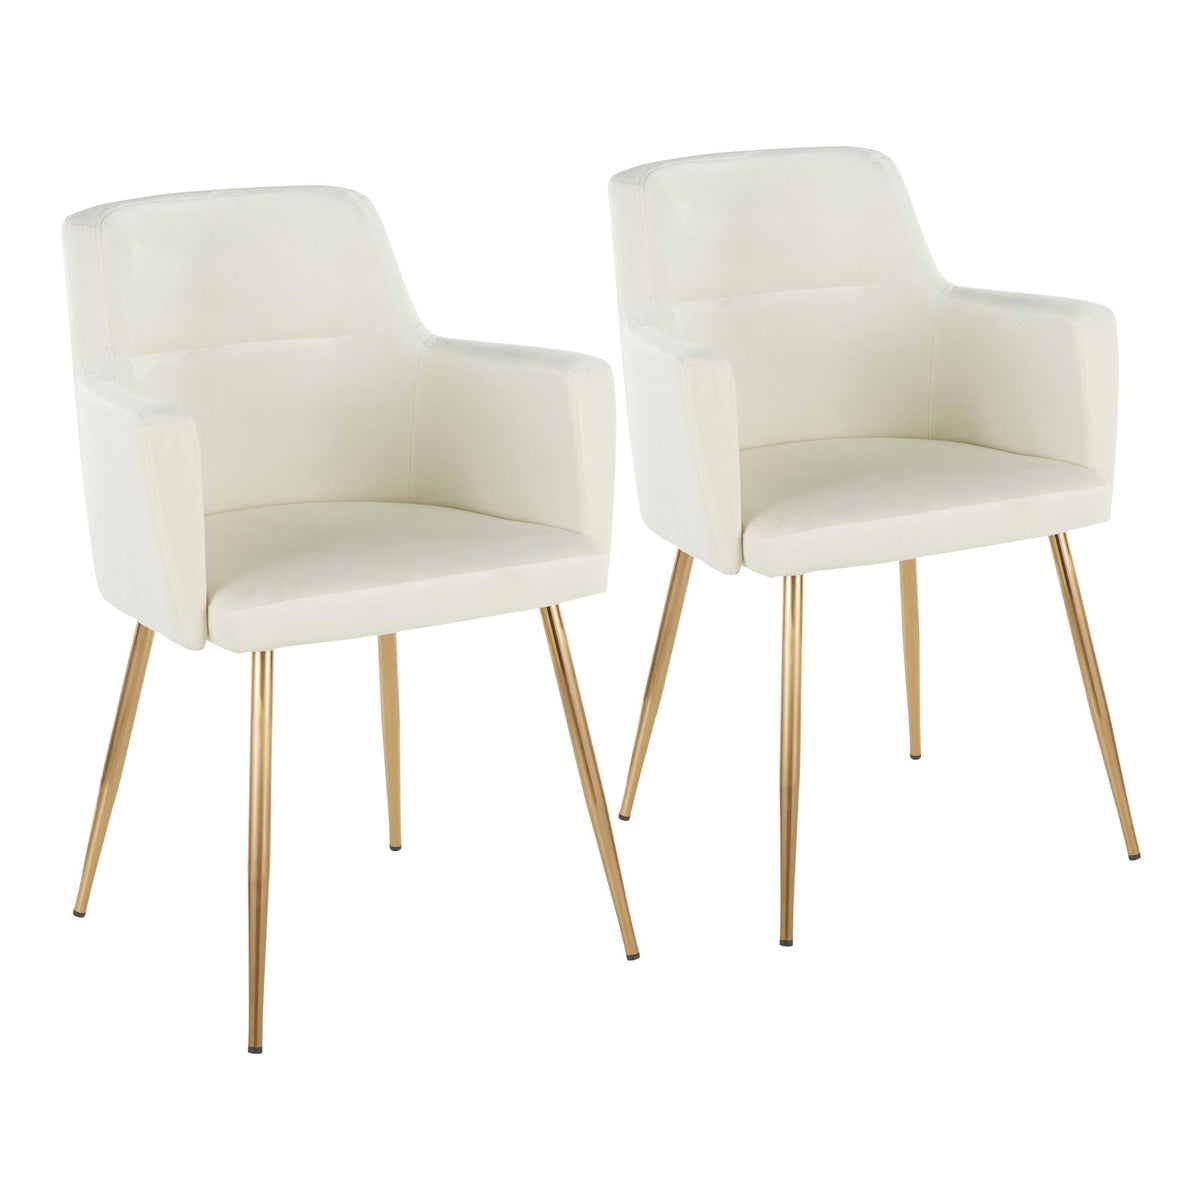 LUMISOURCE ANDREW CHAIR - SET OF 2